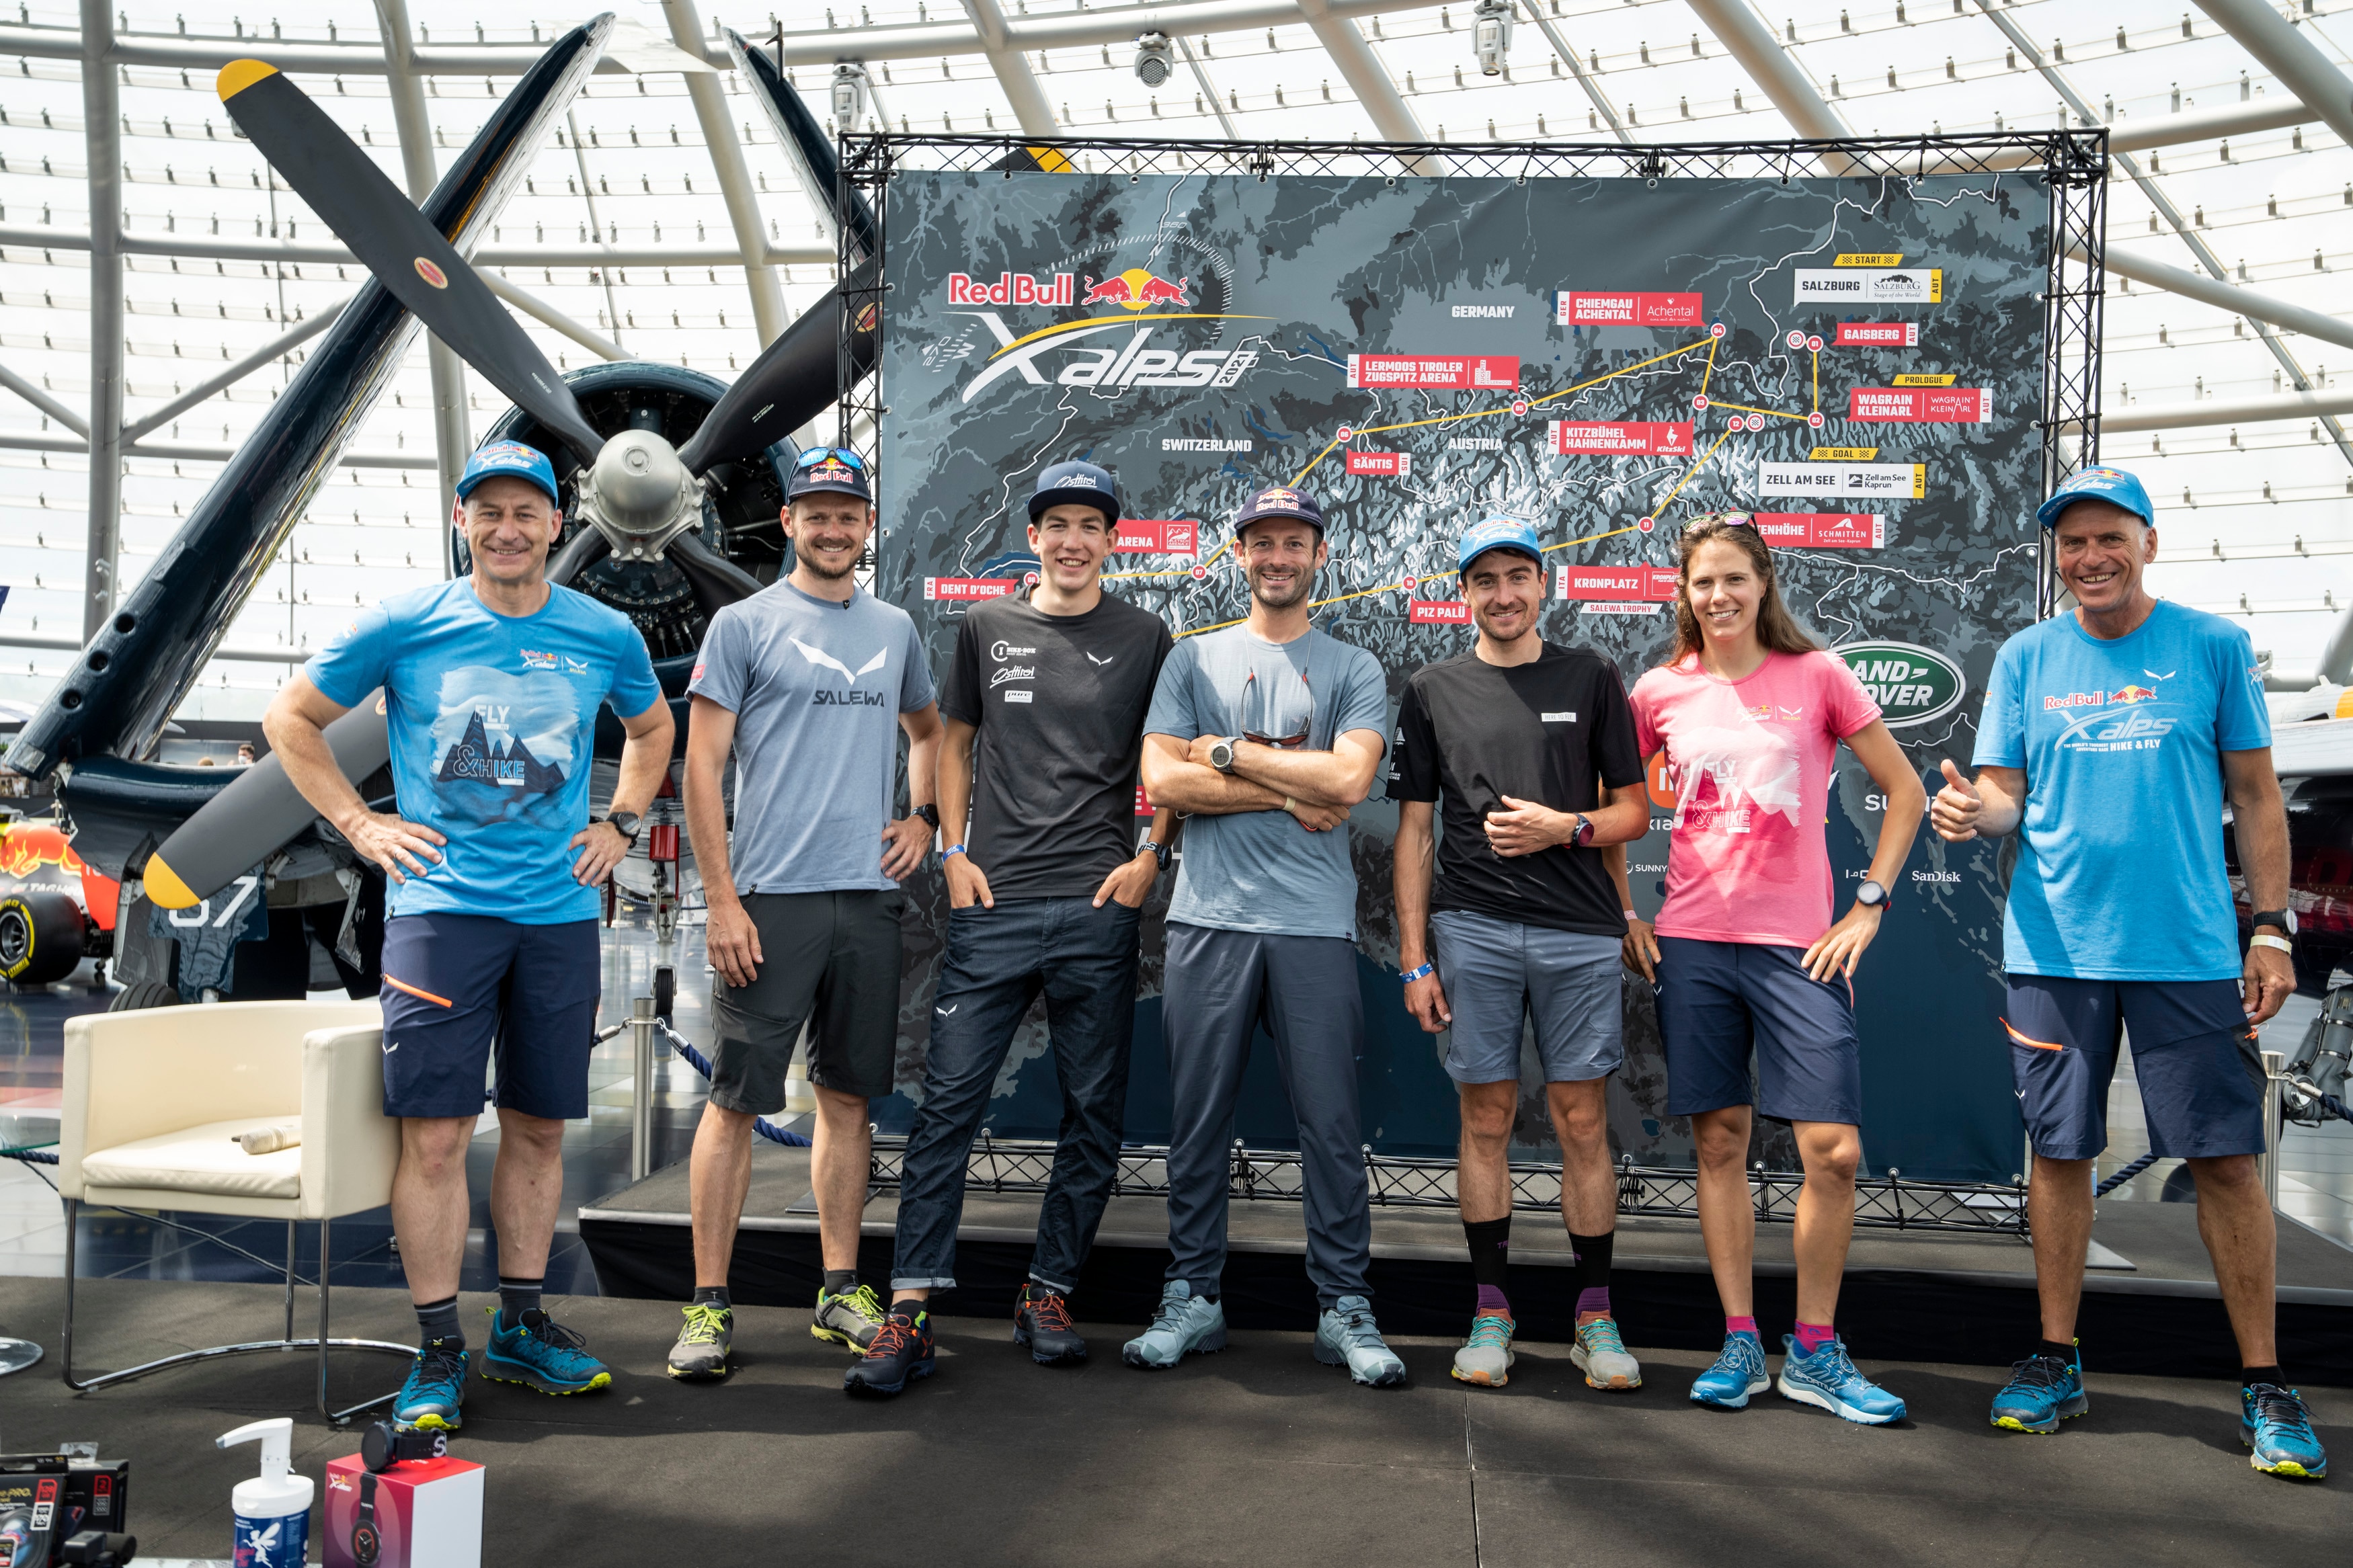 RBC performing during the Red Bull X-Alps press conference at Hangar 7 in Salzburg, Austria on June 19, 2021.